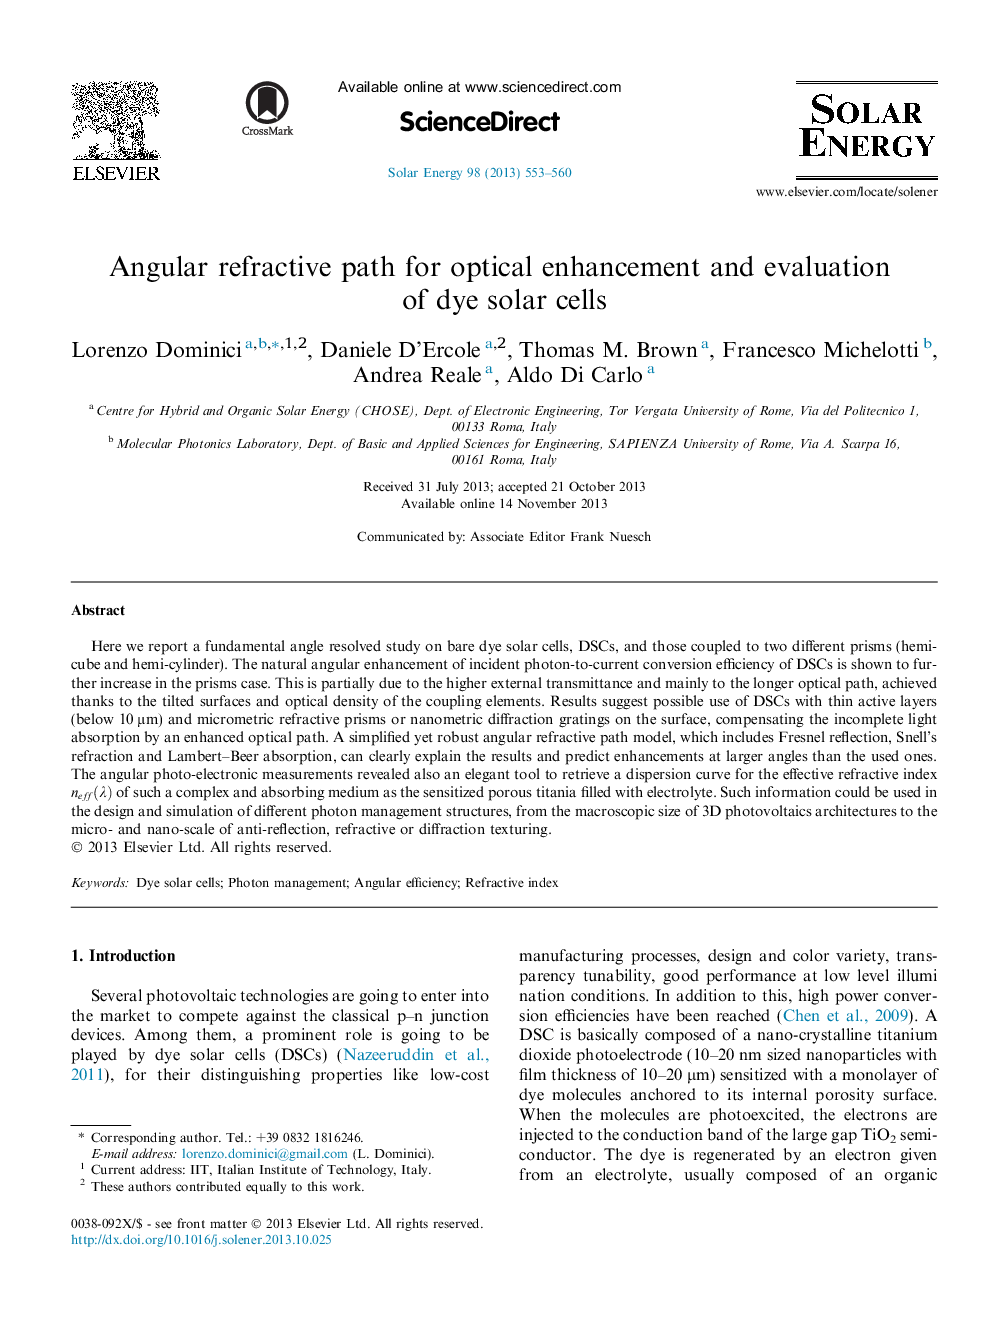 Angular refractive path for optical enhancement and evaluation of dye solar cells